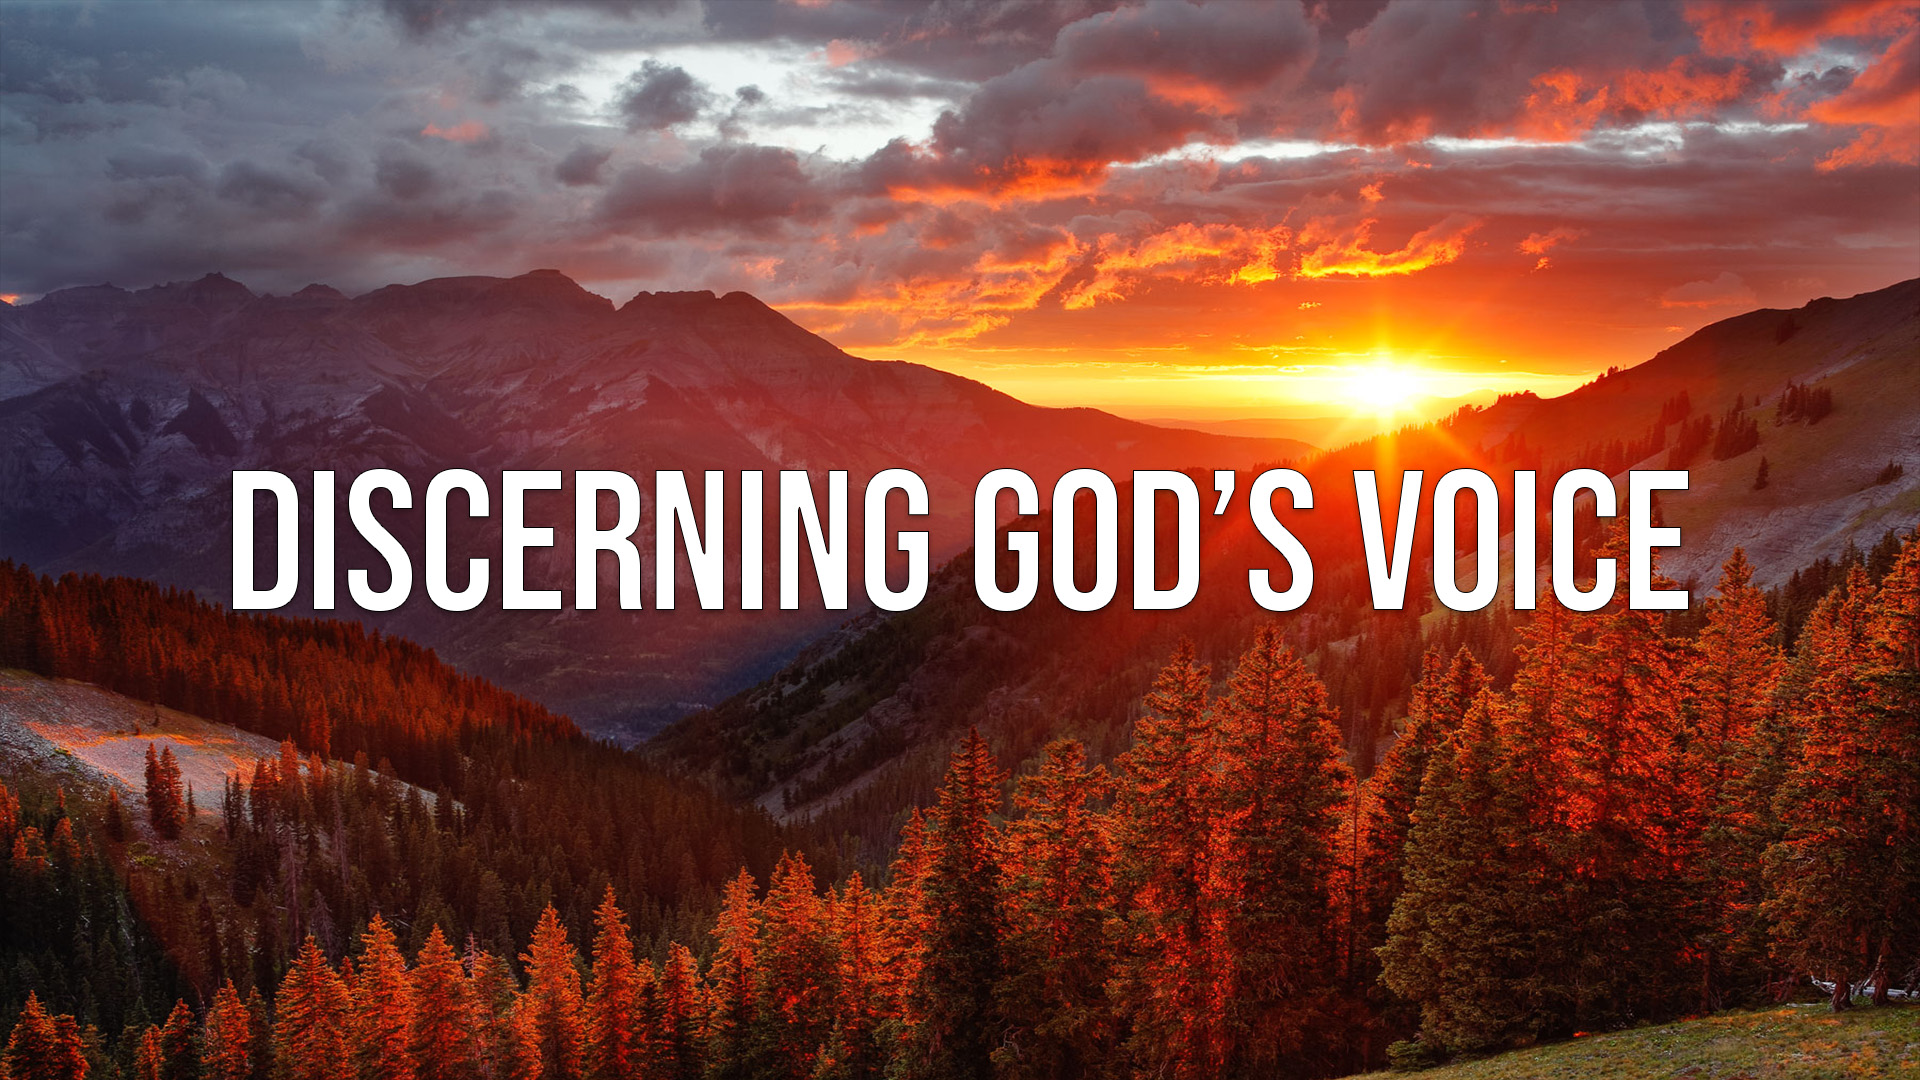 Discerning The Voice of God - Why He Speaks